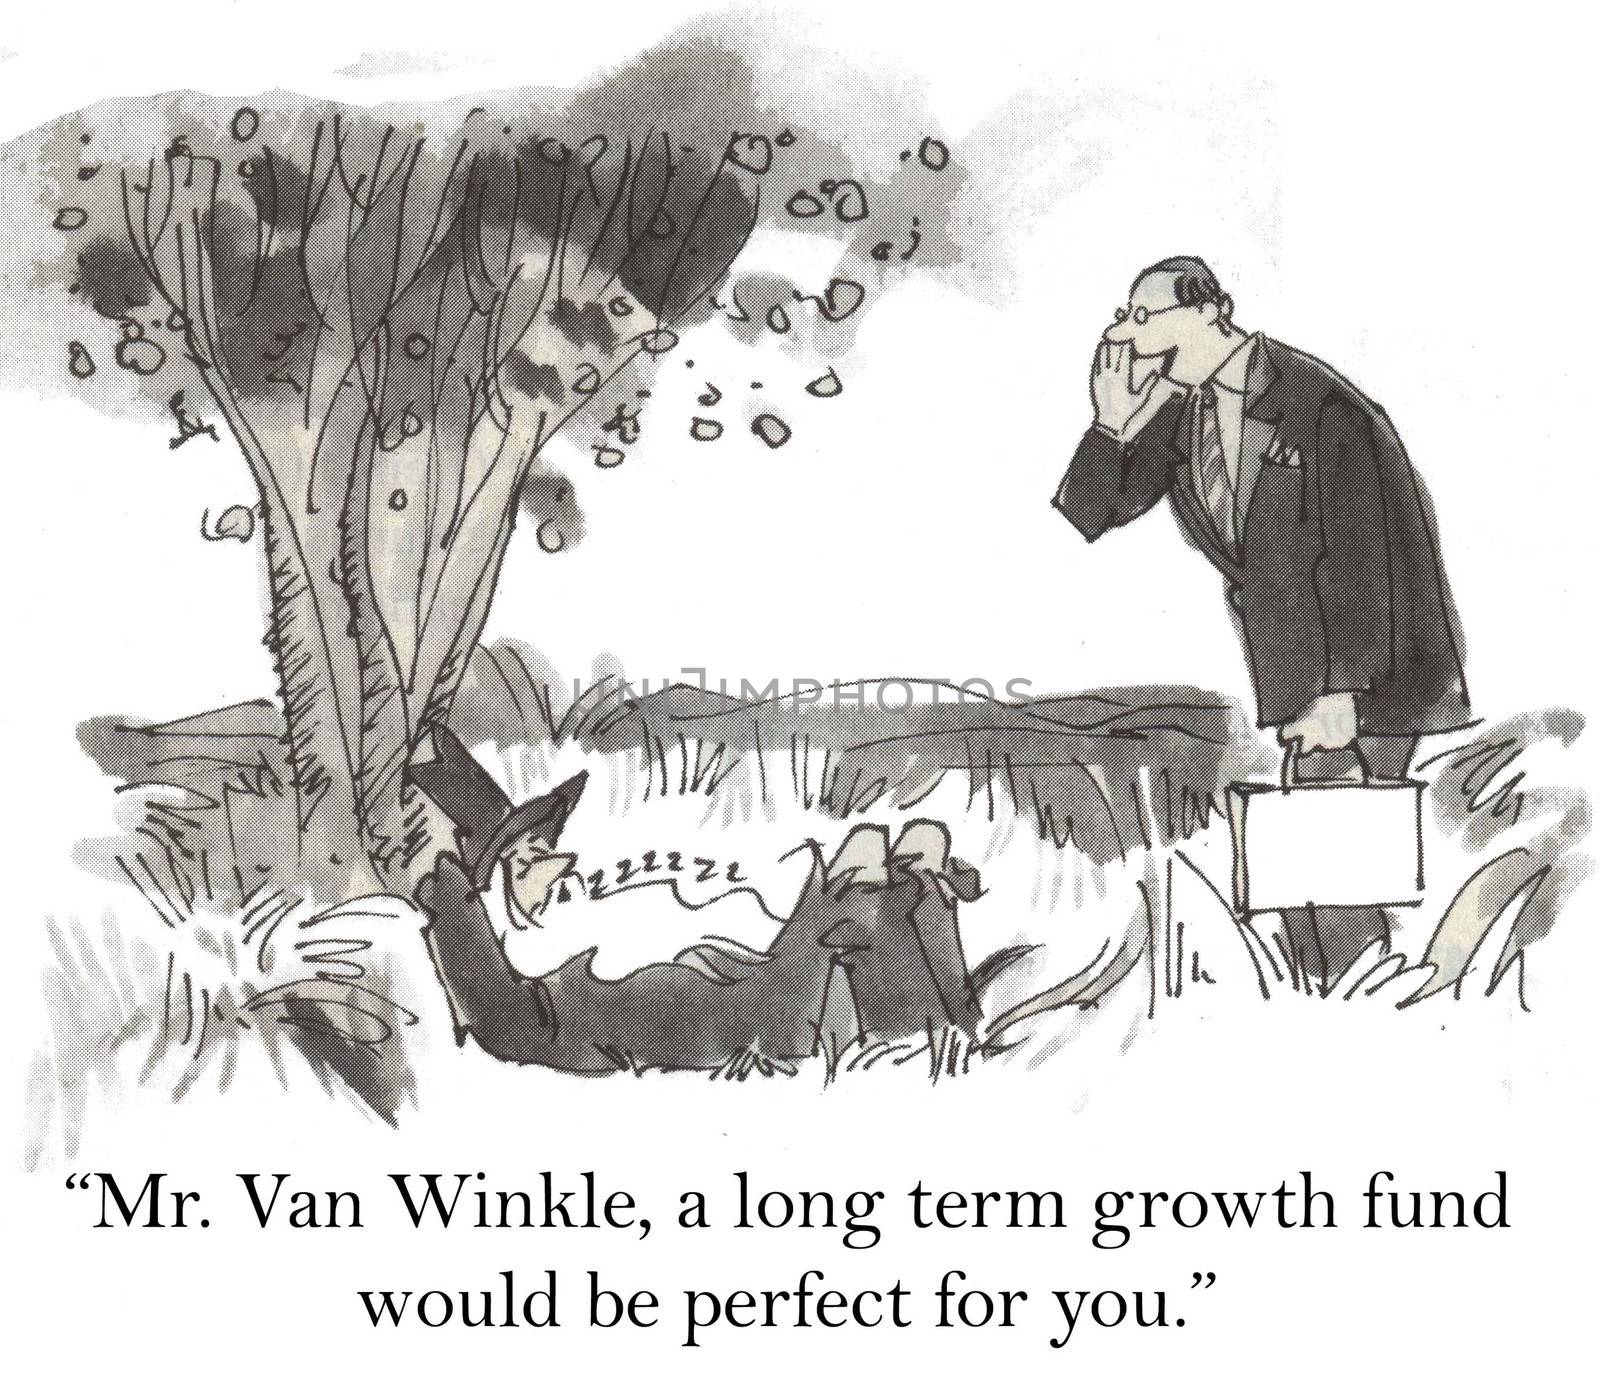 "Mr. Van Winkle, a long term growth fund would be perfect for you."